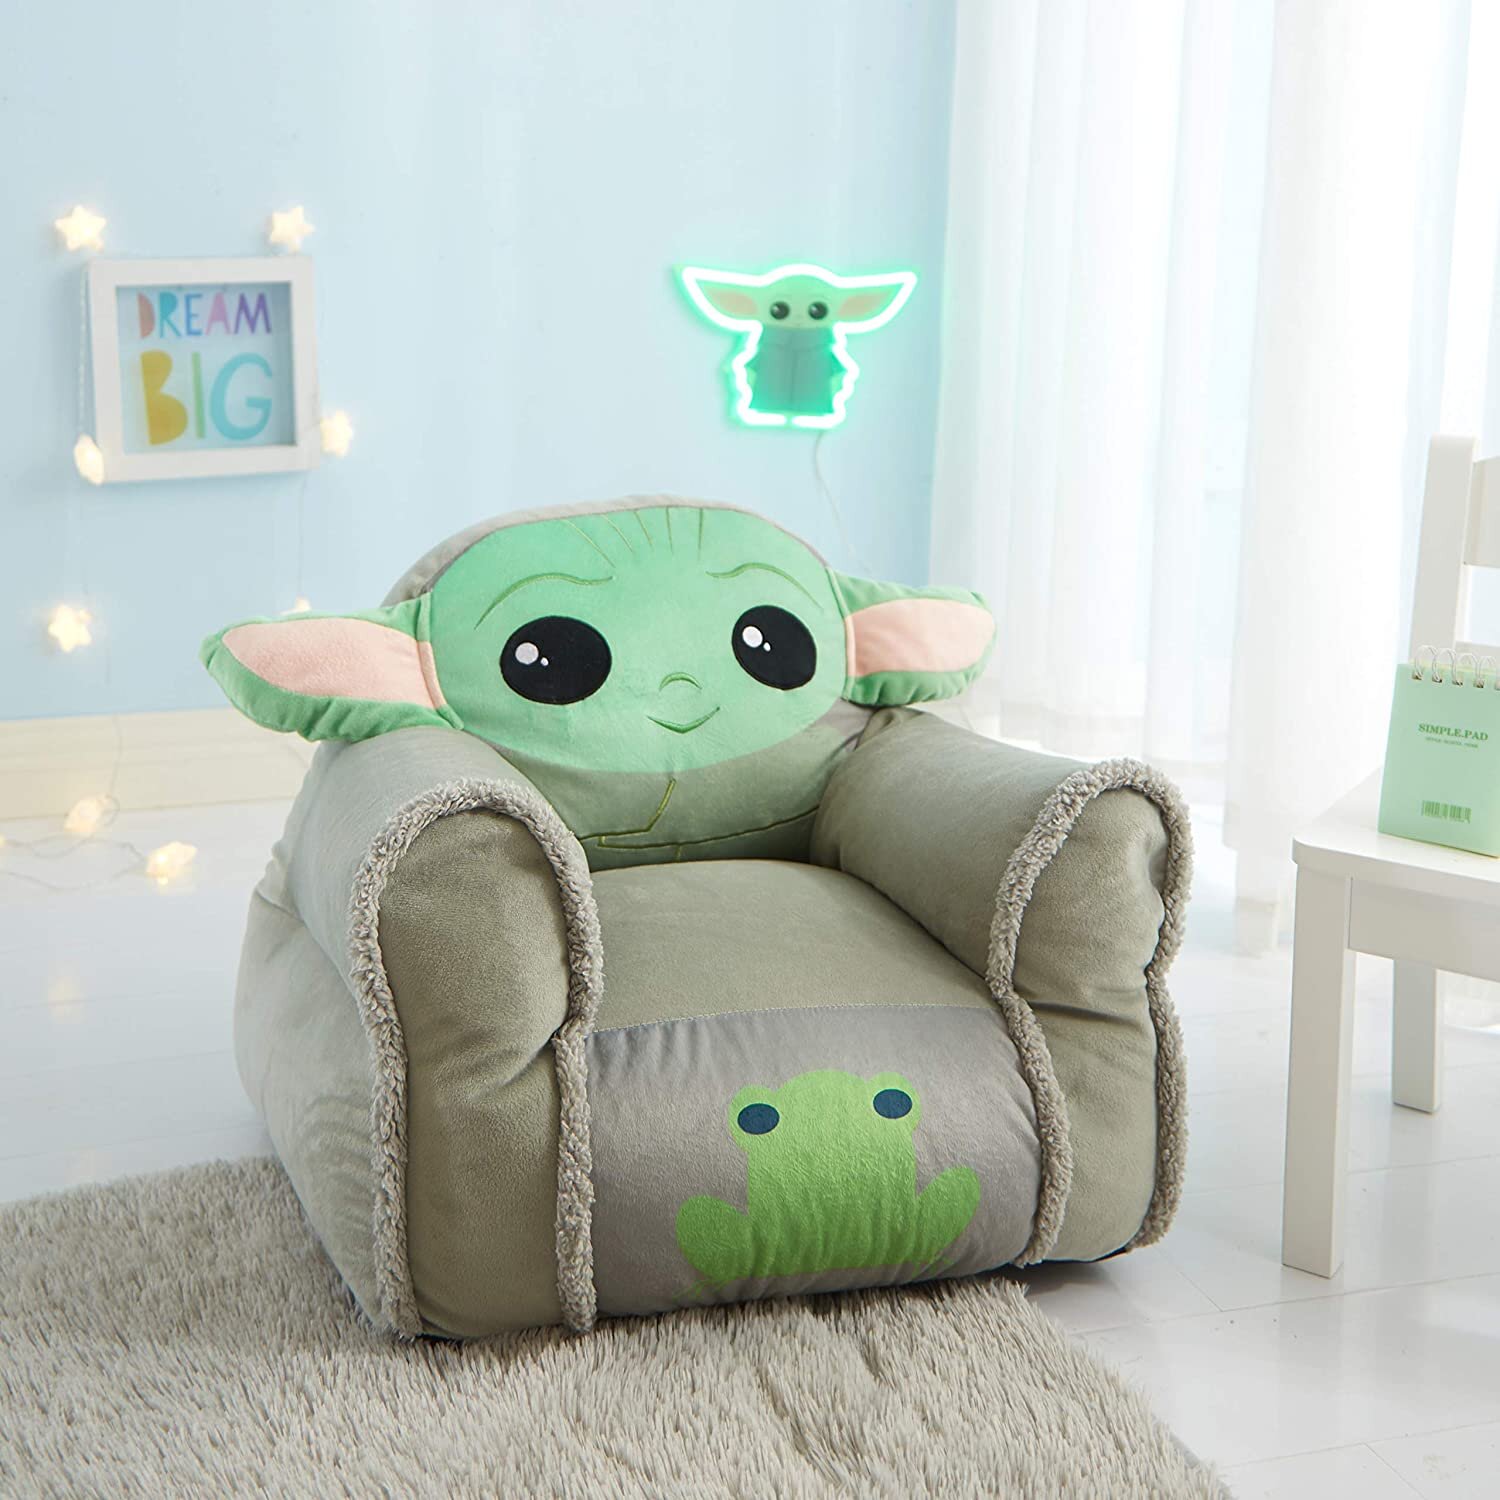 Details about   RARE Disney Star Wars Mandalorian The Child Plush Bean Bag Chair NEW for Easter 